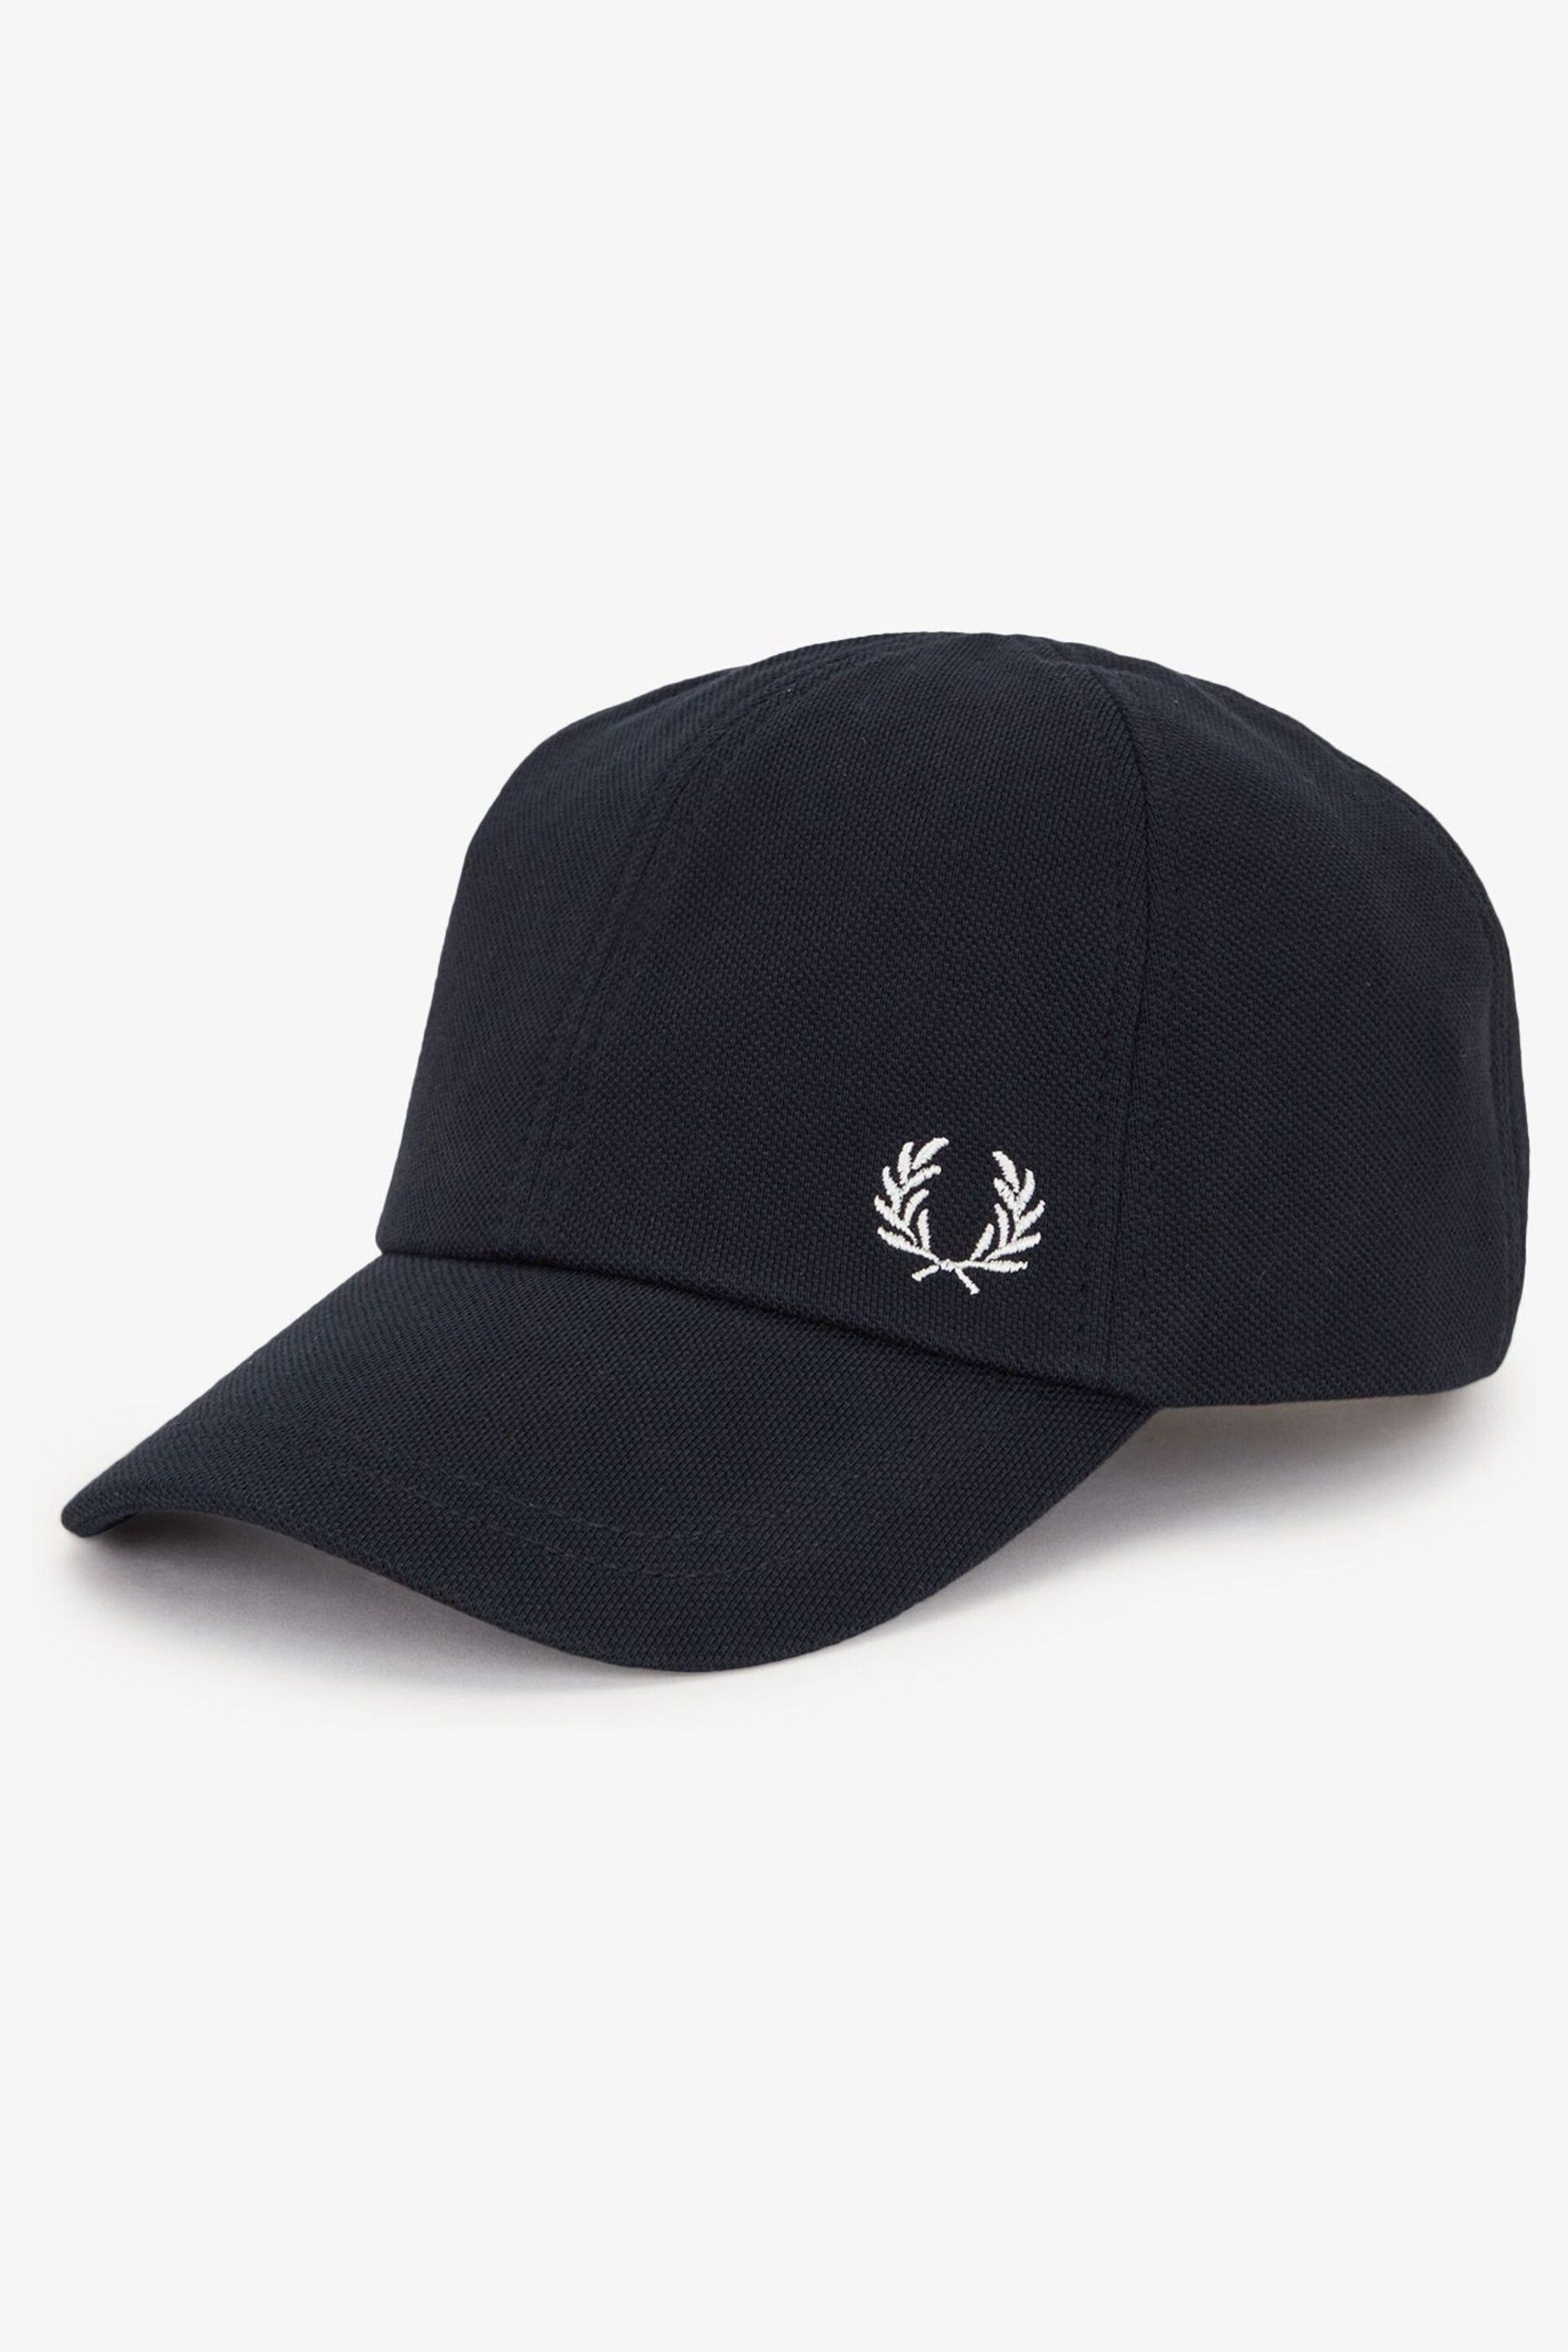 Fred Perry Cotton Pique Classic Cap - Image 1 of 6